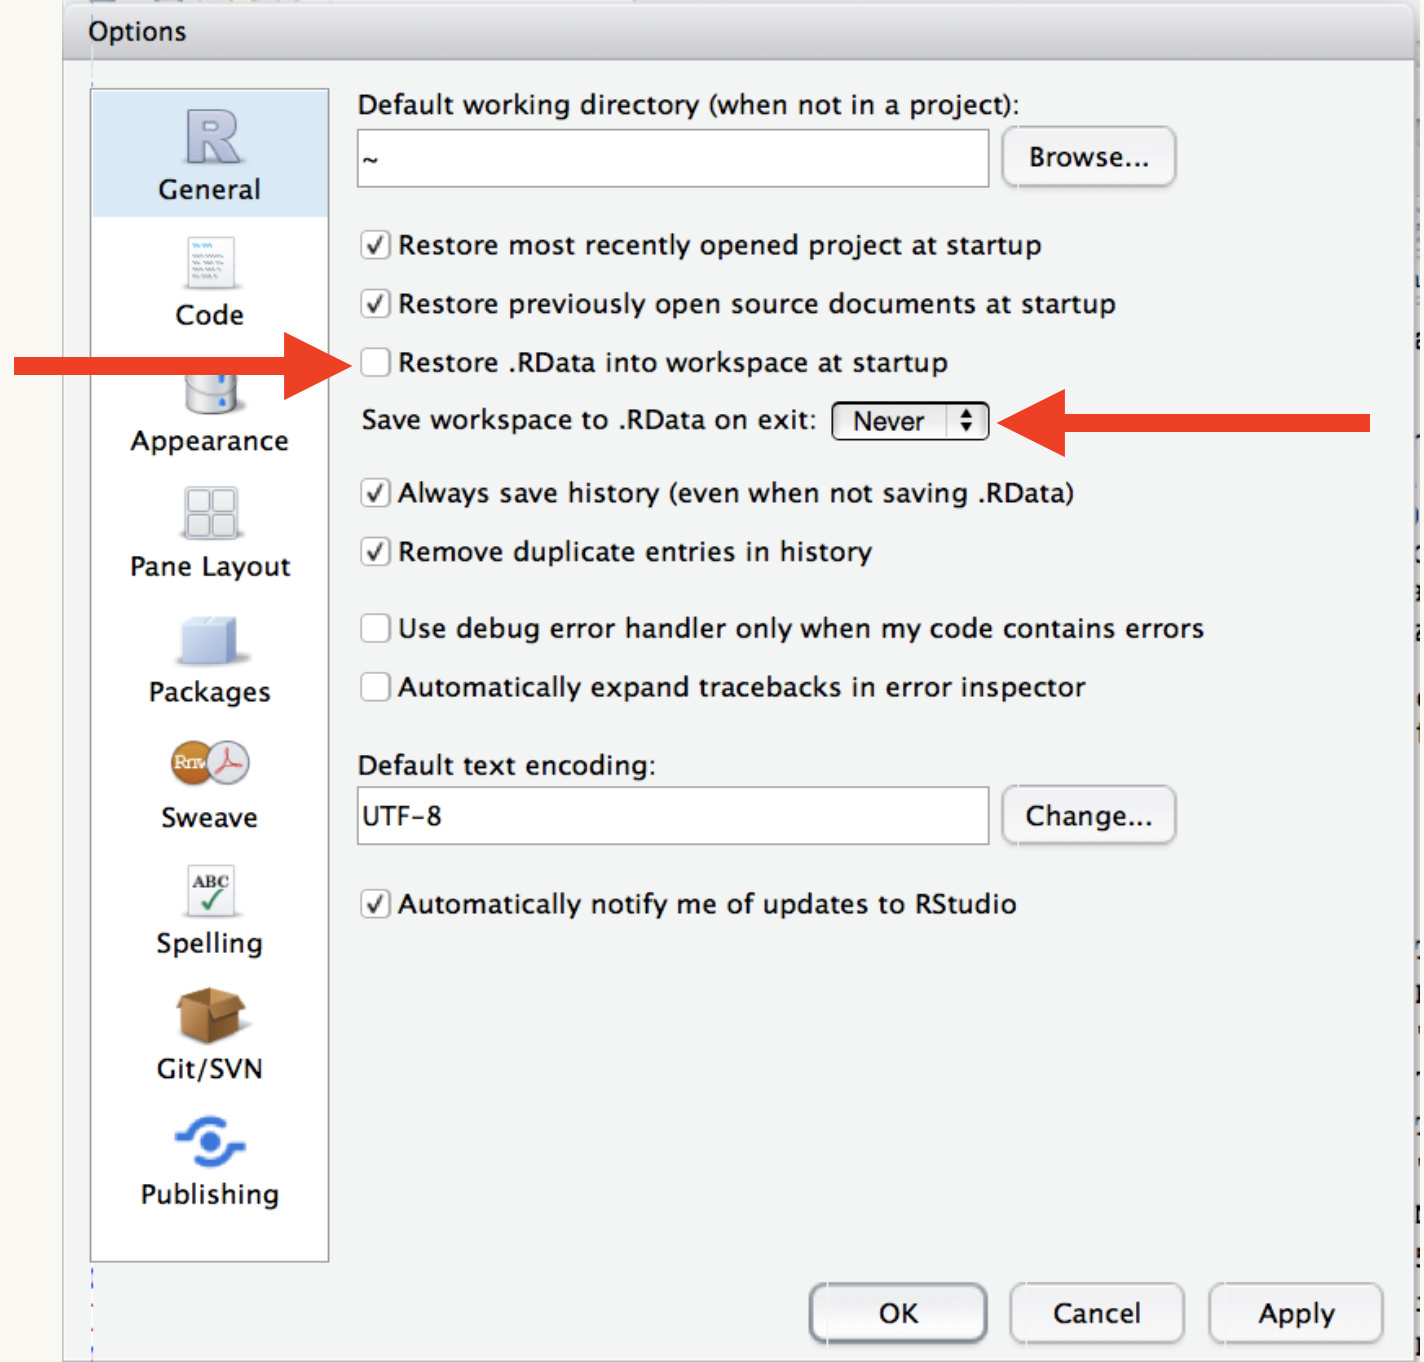 RStudio global options window showing a setting optimal for reproducibility